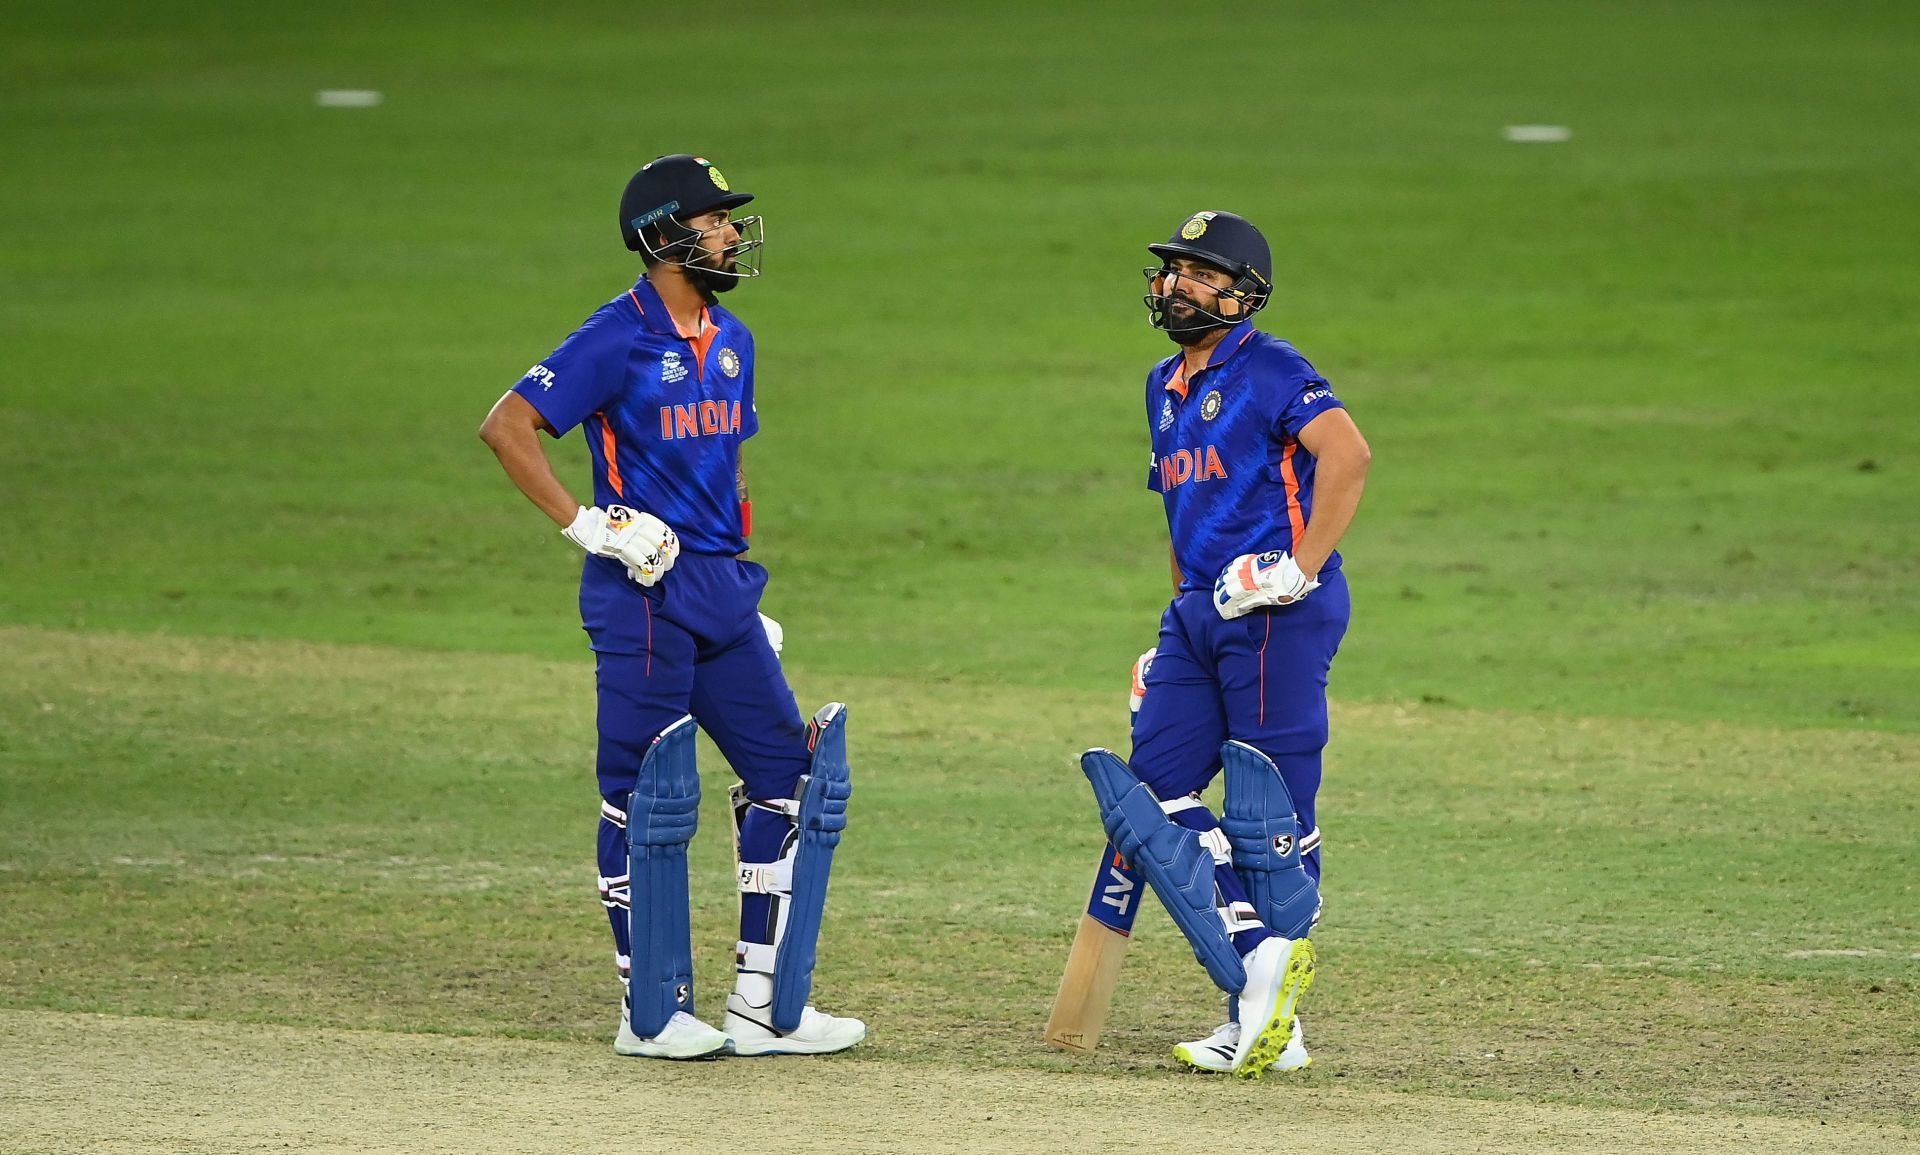 KL Rahul (left) and Rohit Sharma. Pic: Getty Images